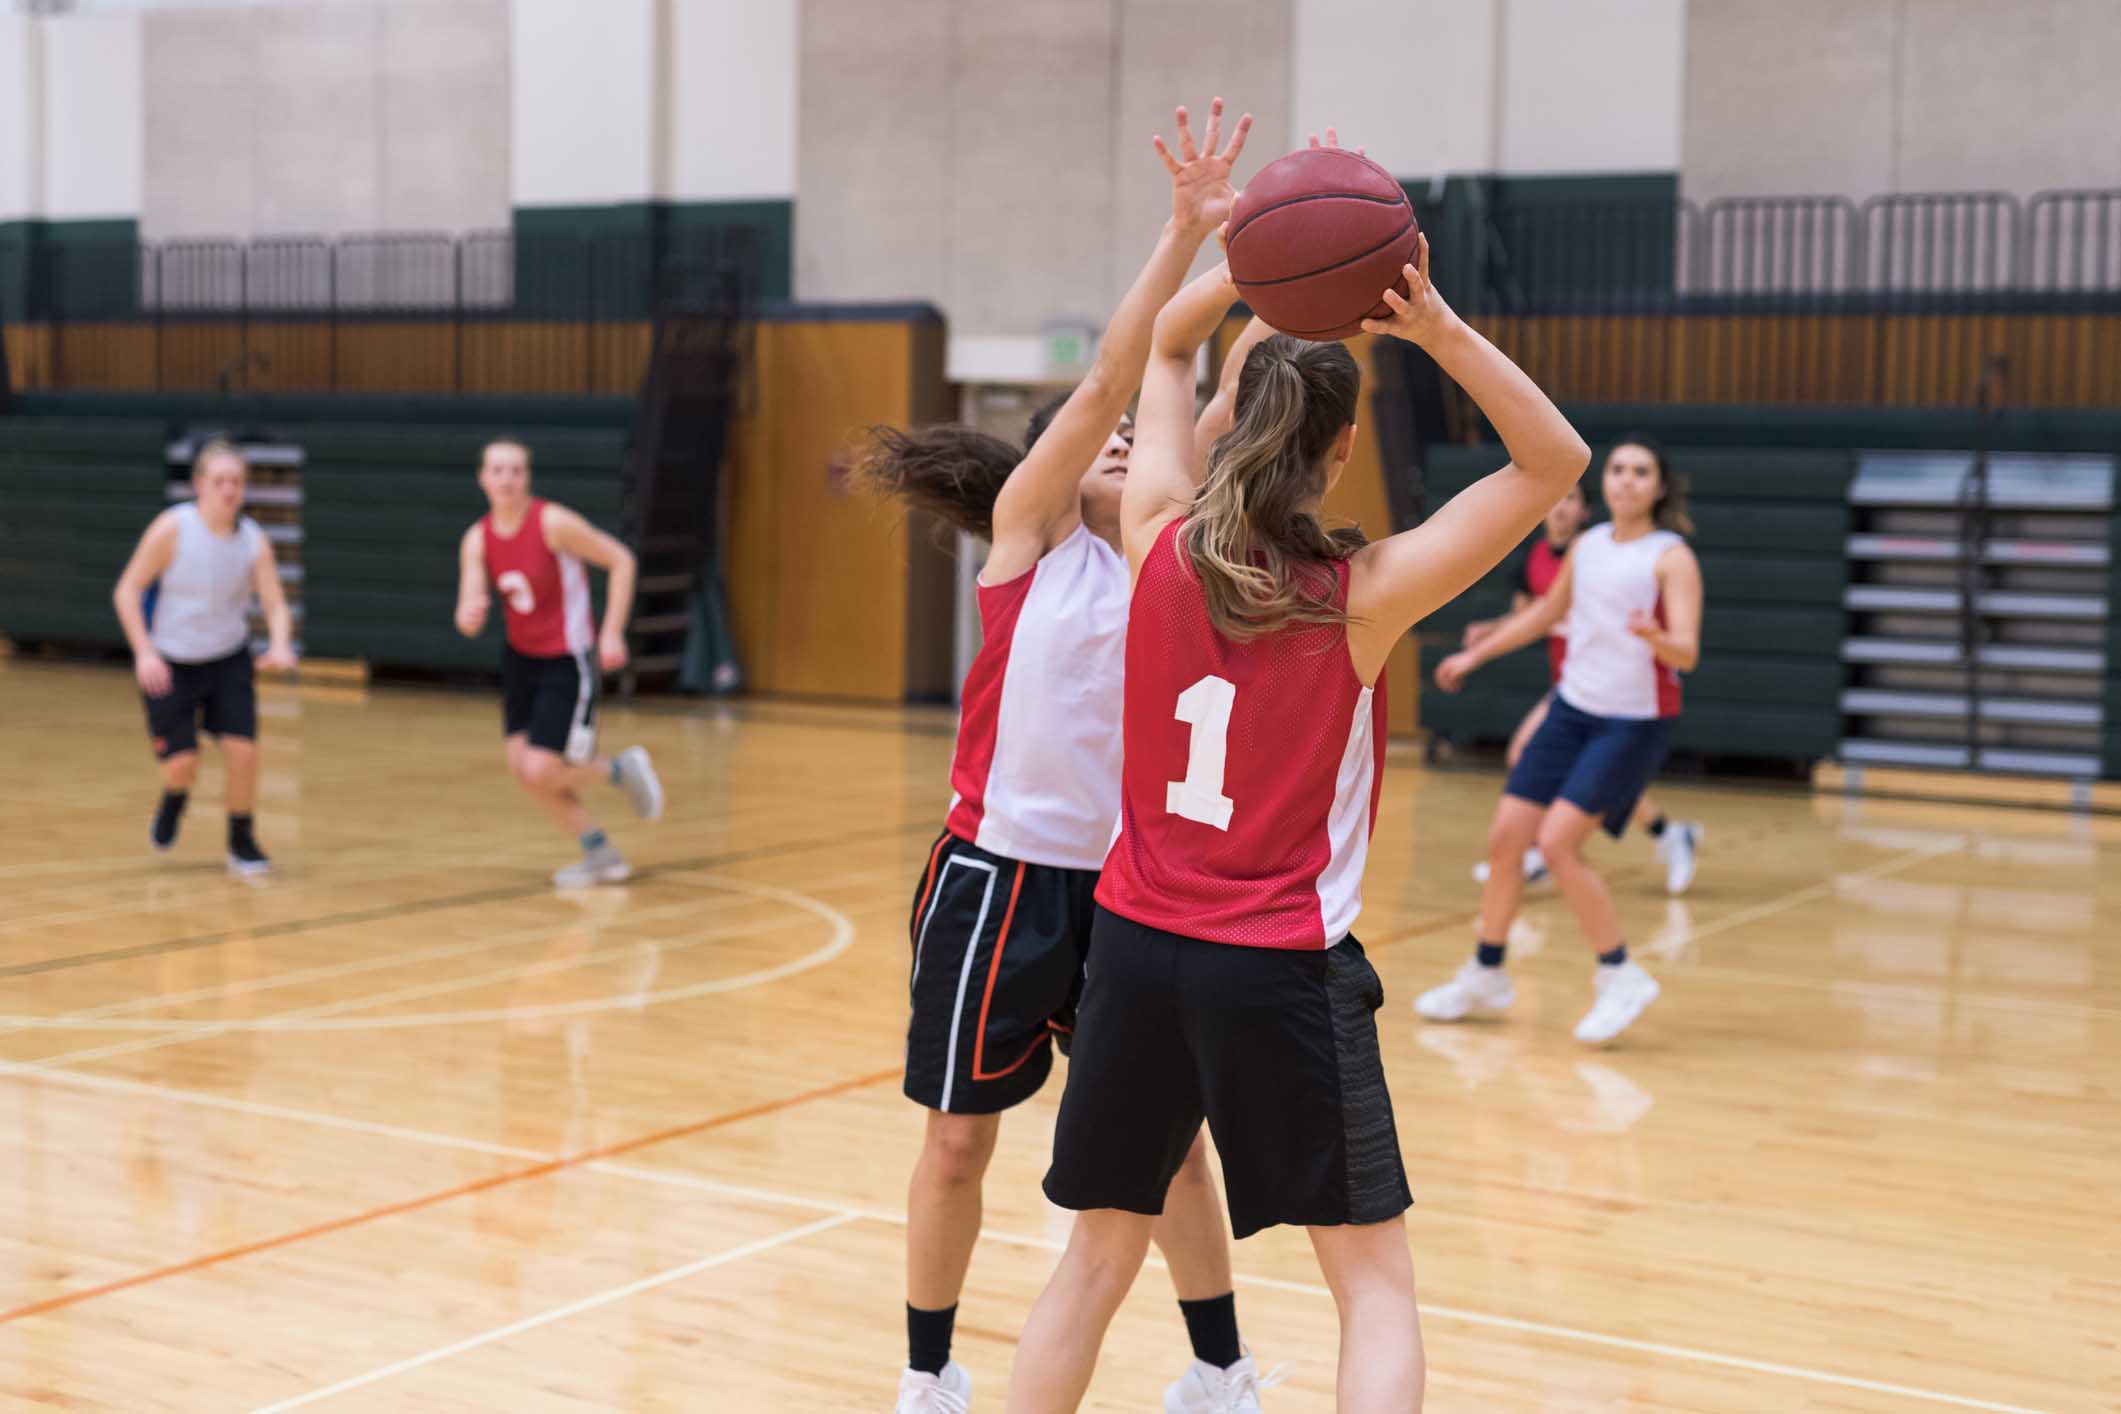 LBL in Young Women and Athletes